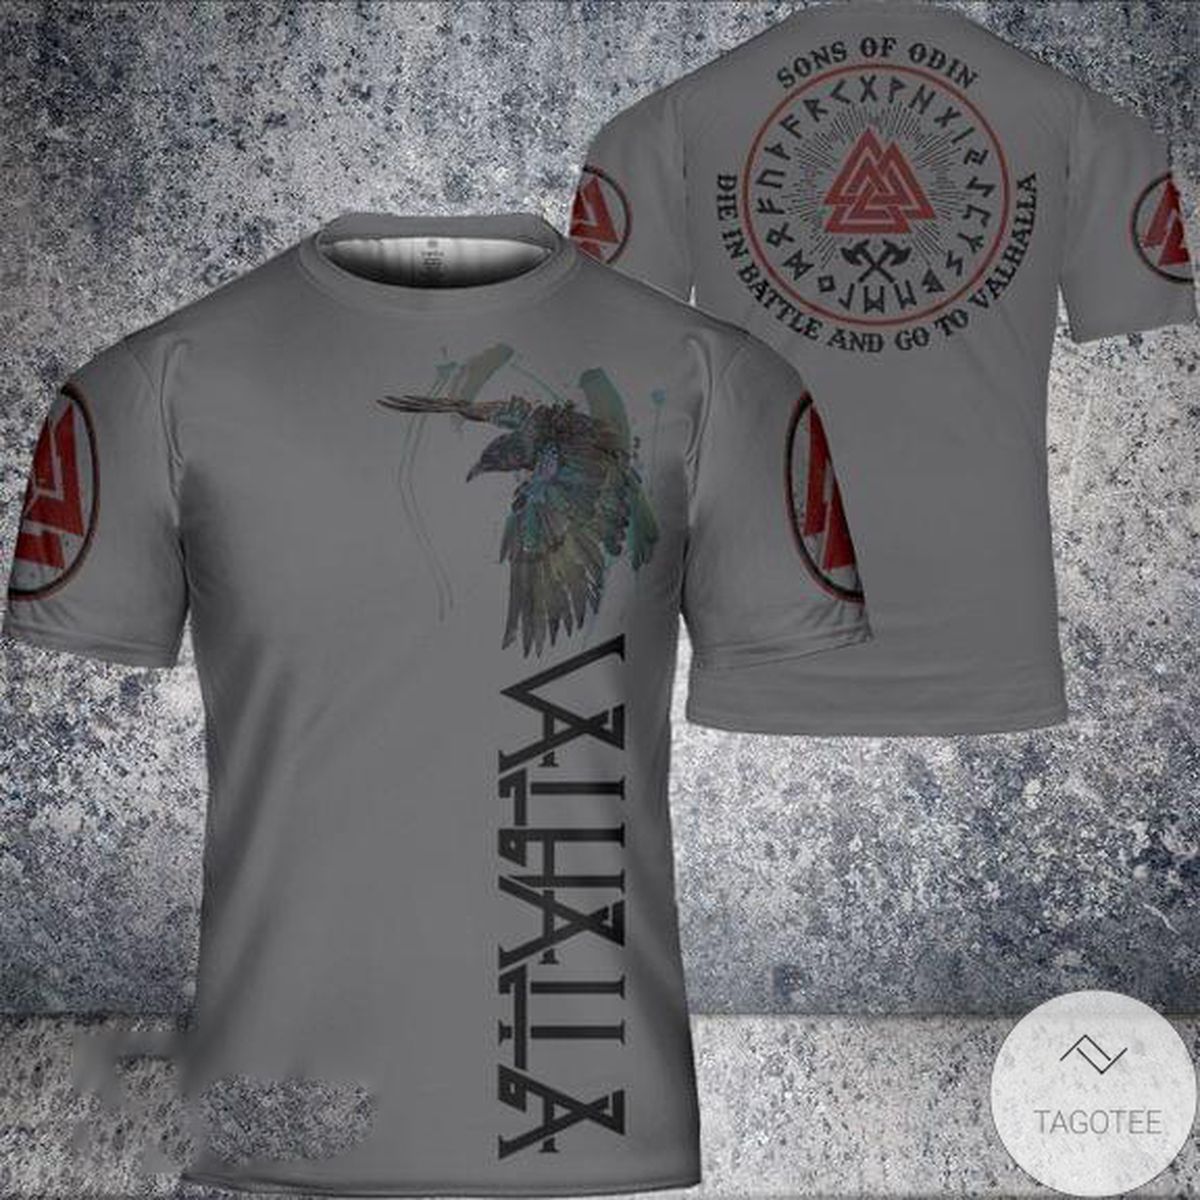 Son Of Odin Die In Battle And Go To Valhalla T-Shirt